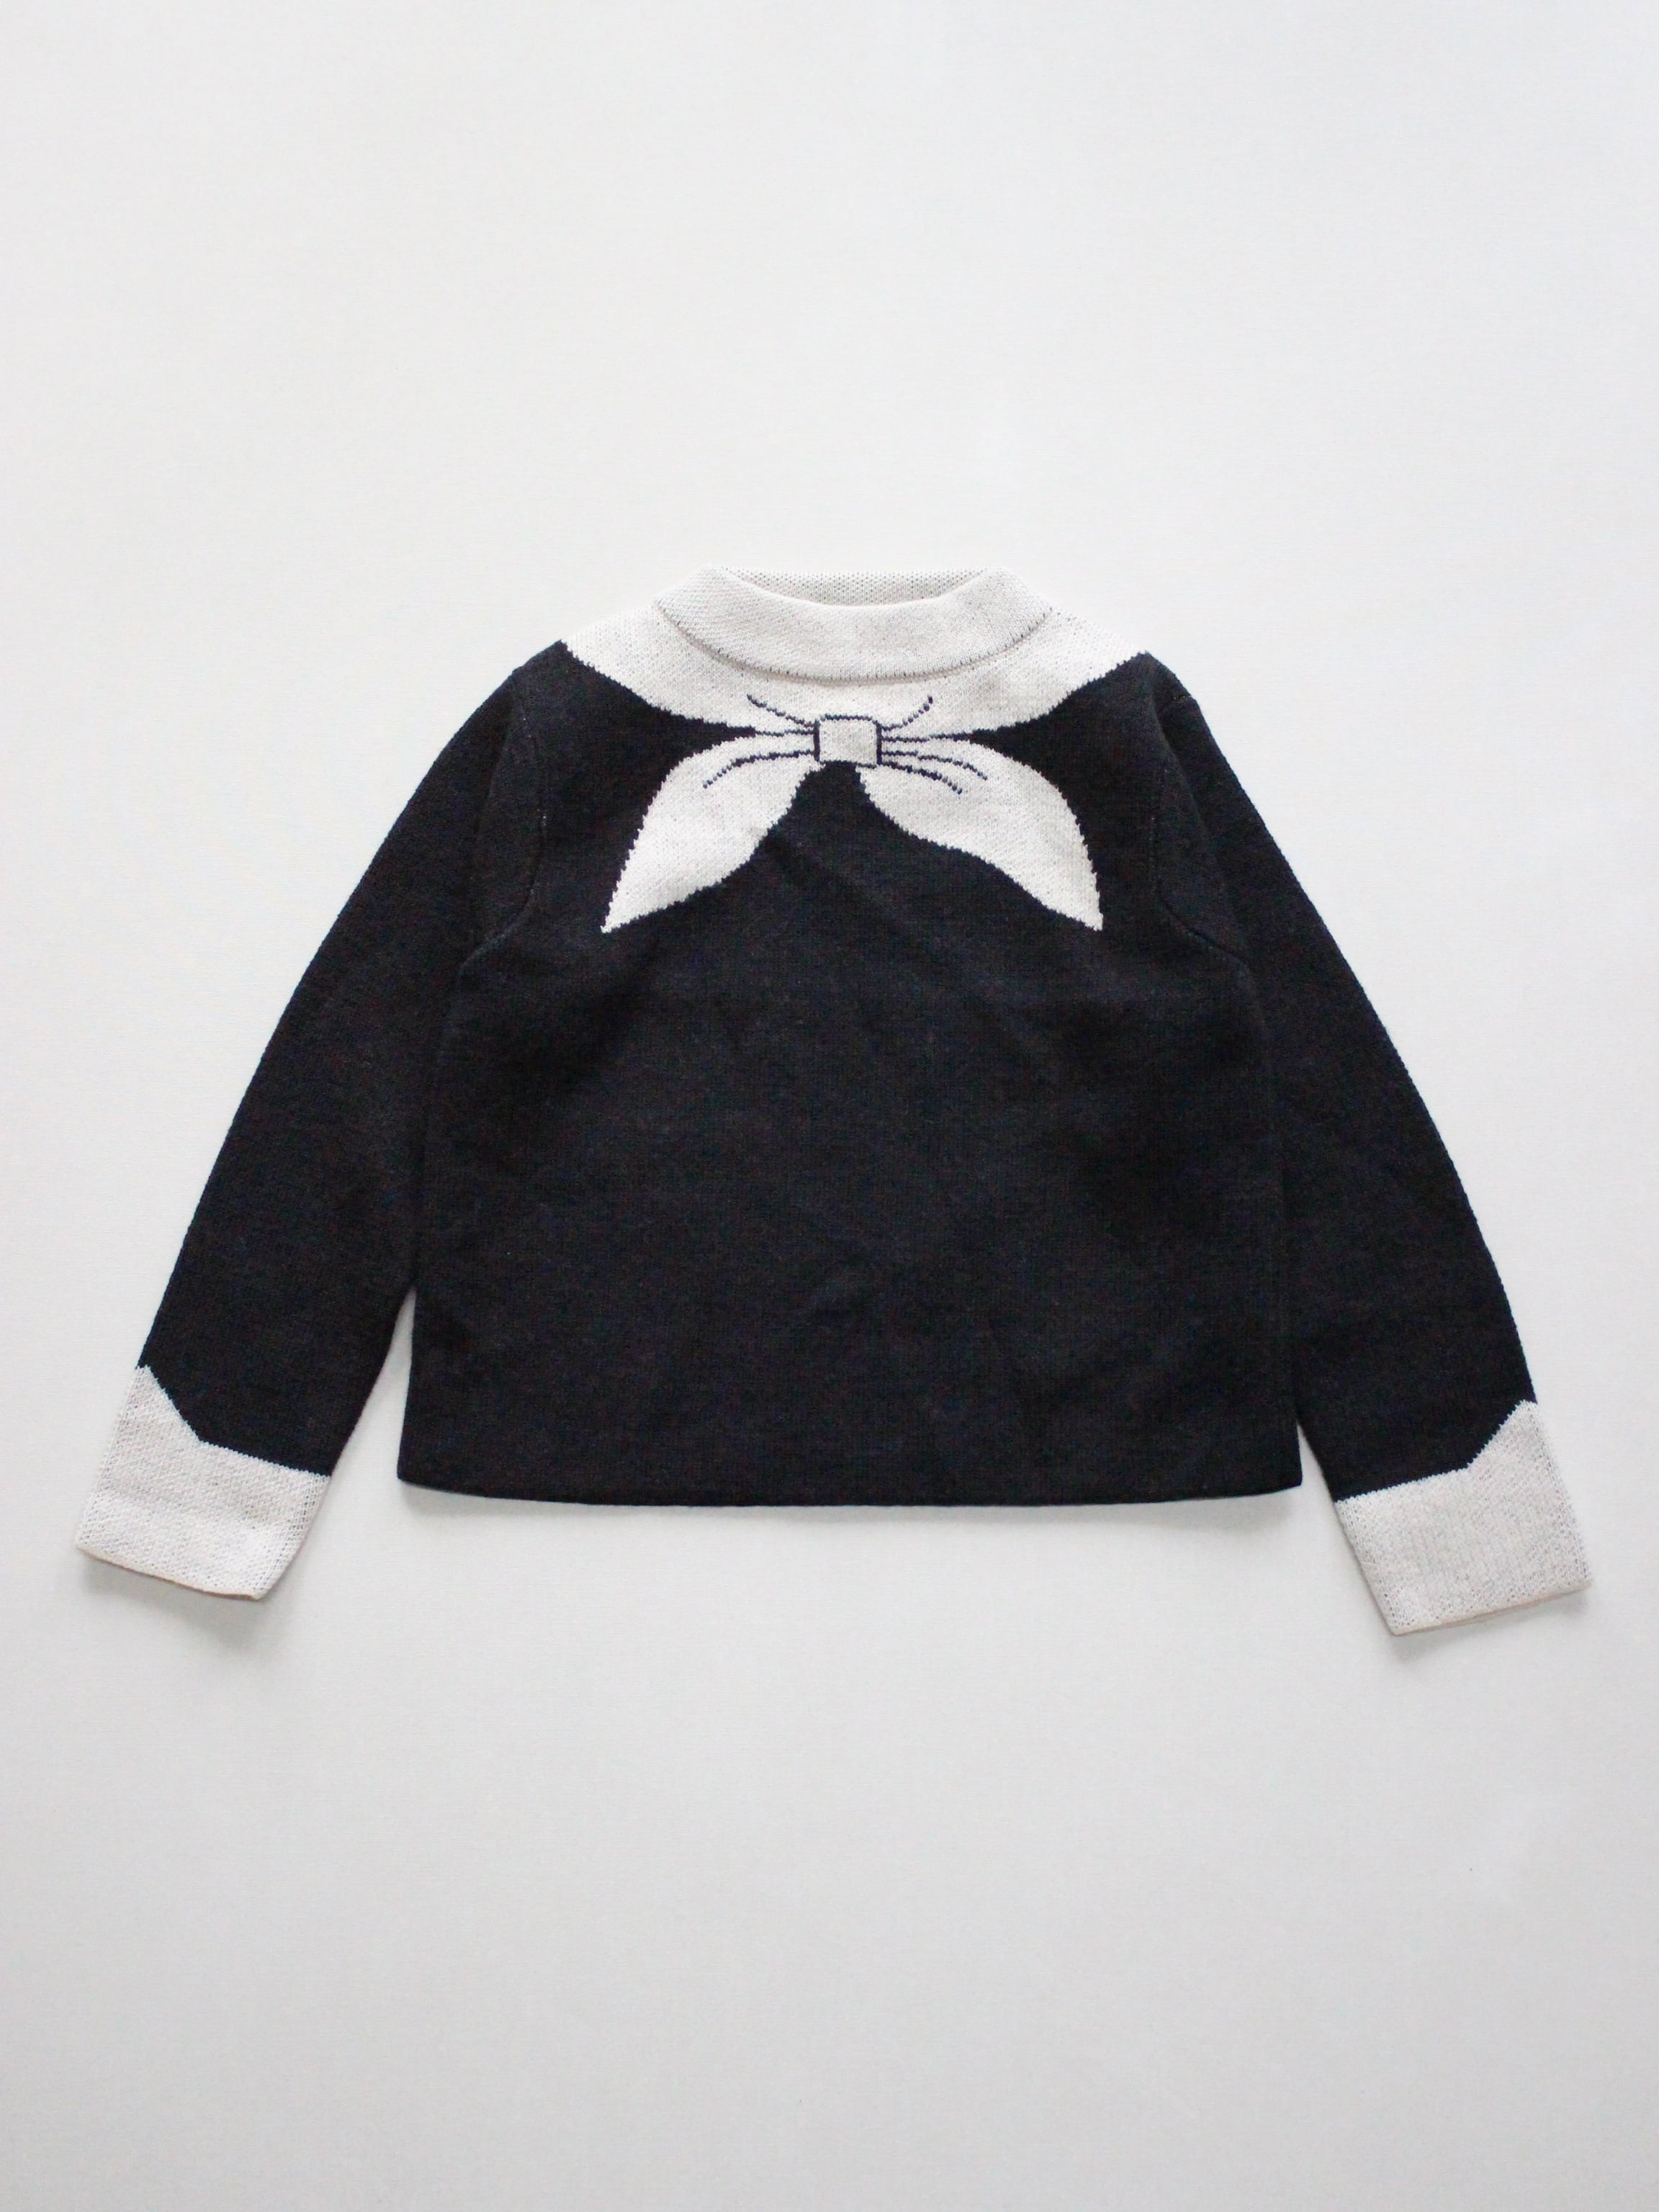 Misha & Puff / Bow Scout Sweater / 4Y